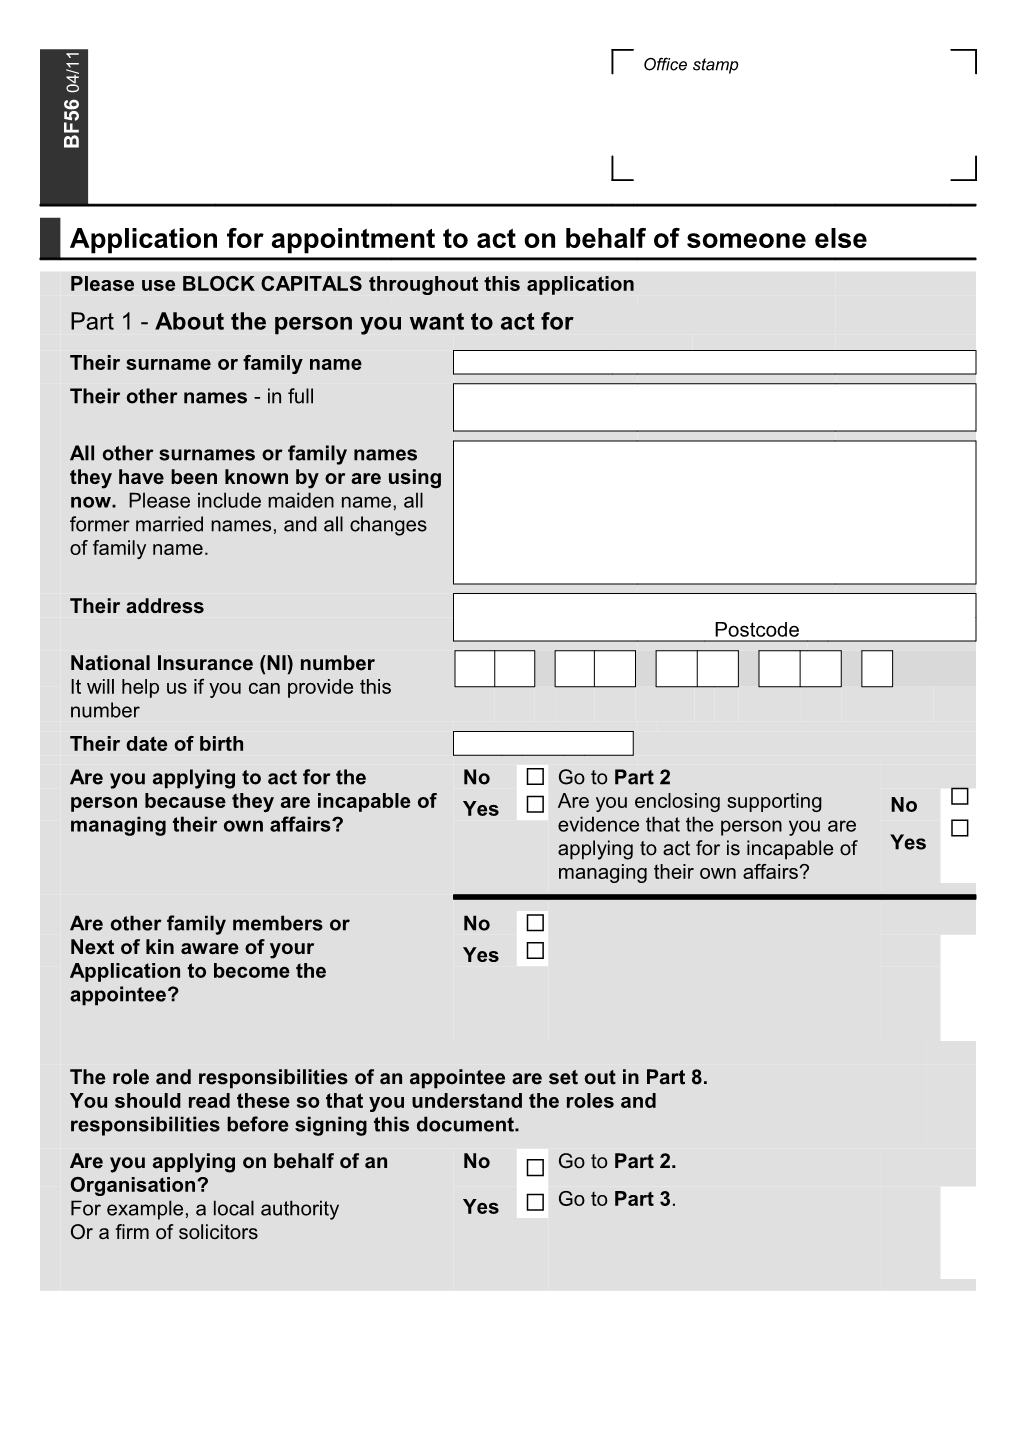 Application for Appointment to Act on Behalf of Someone Else